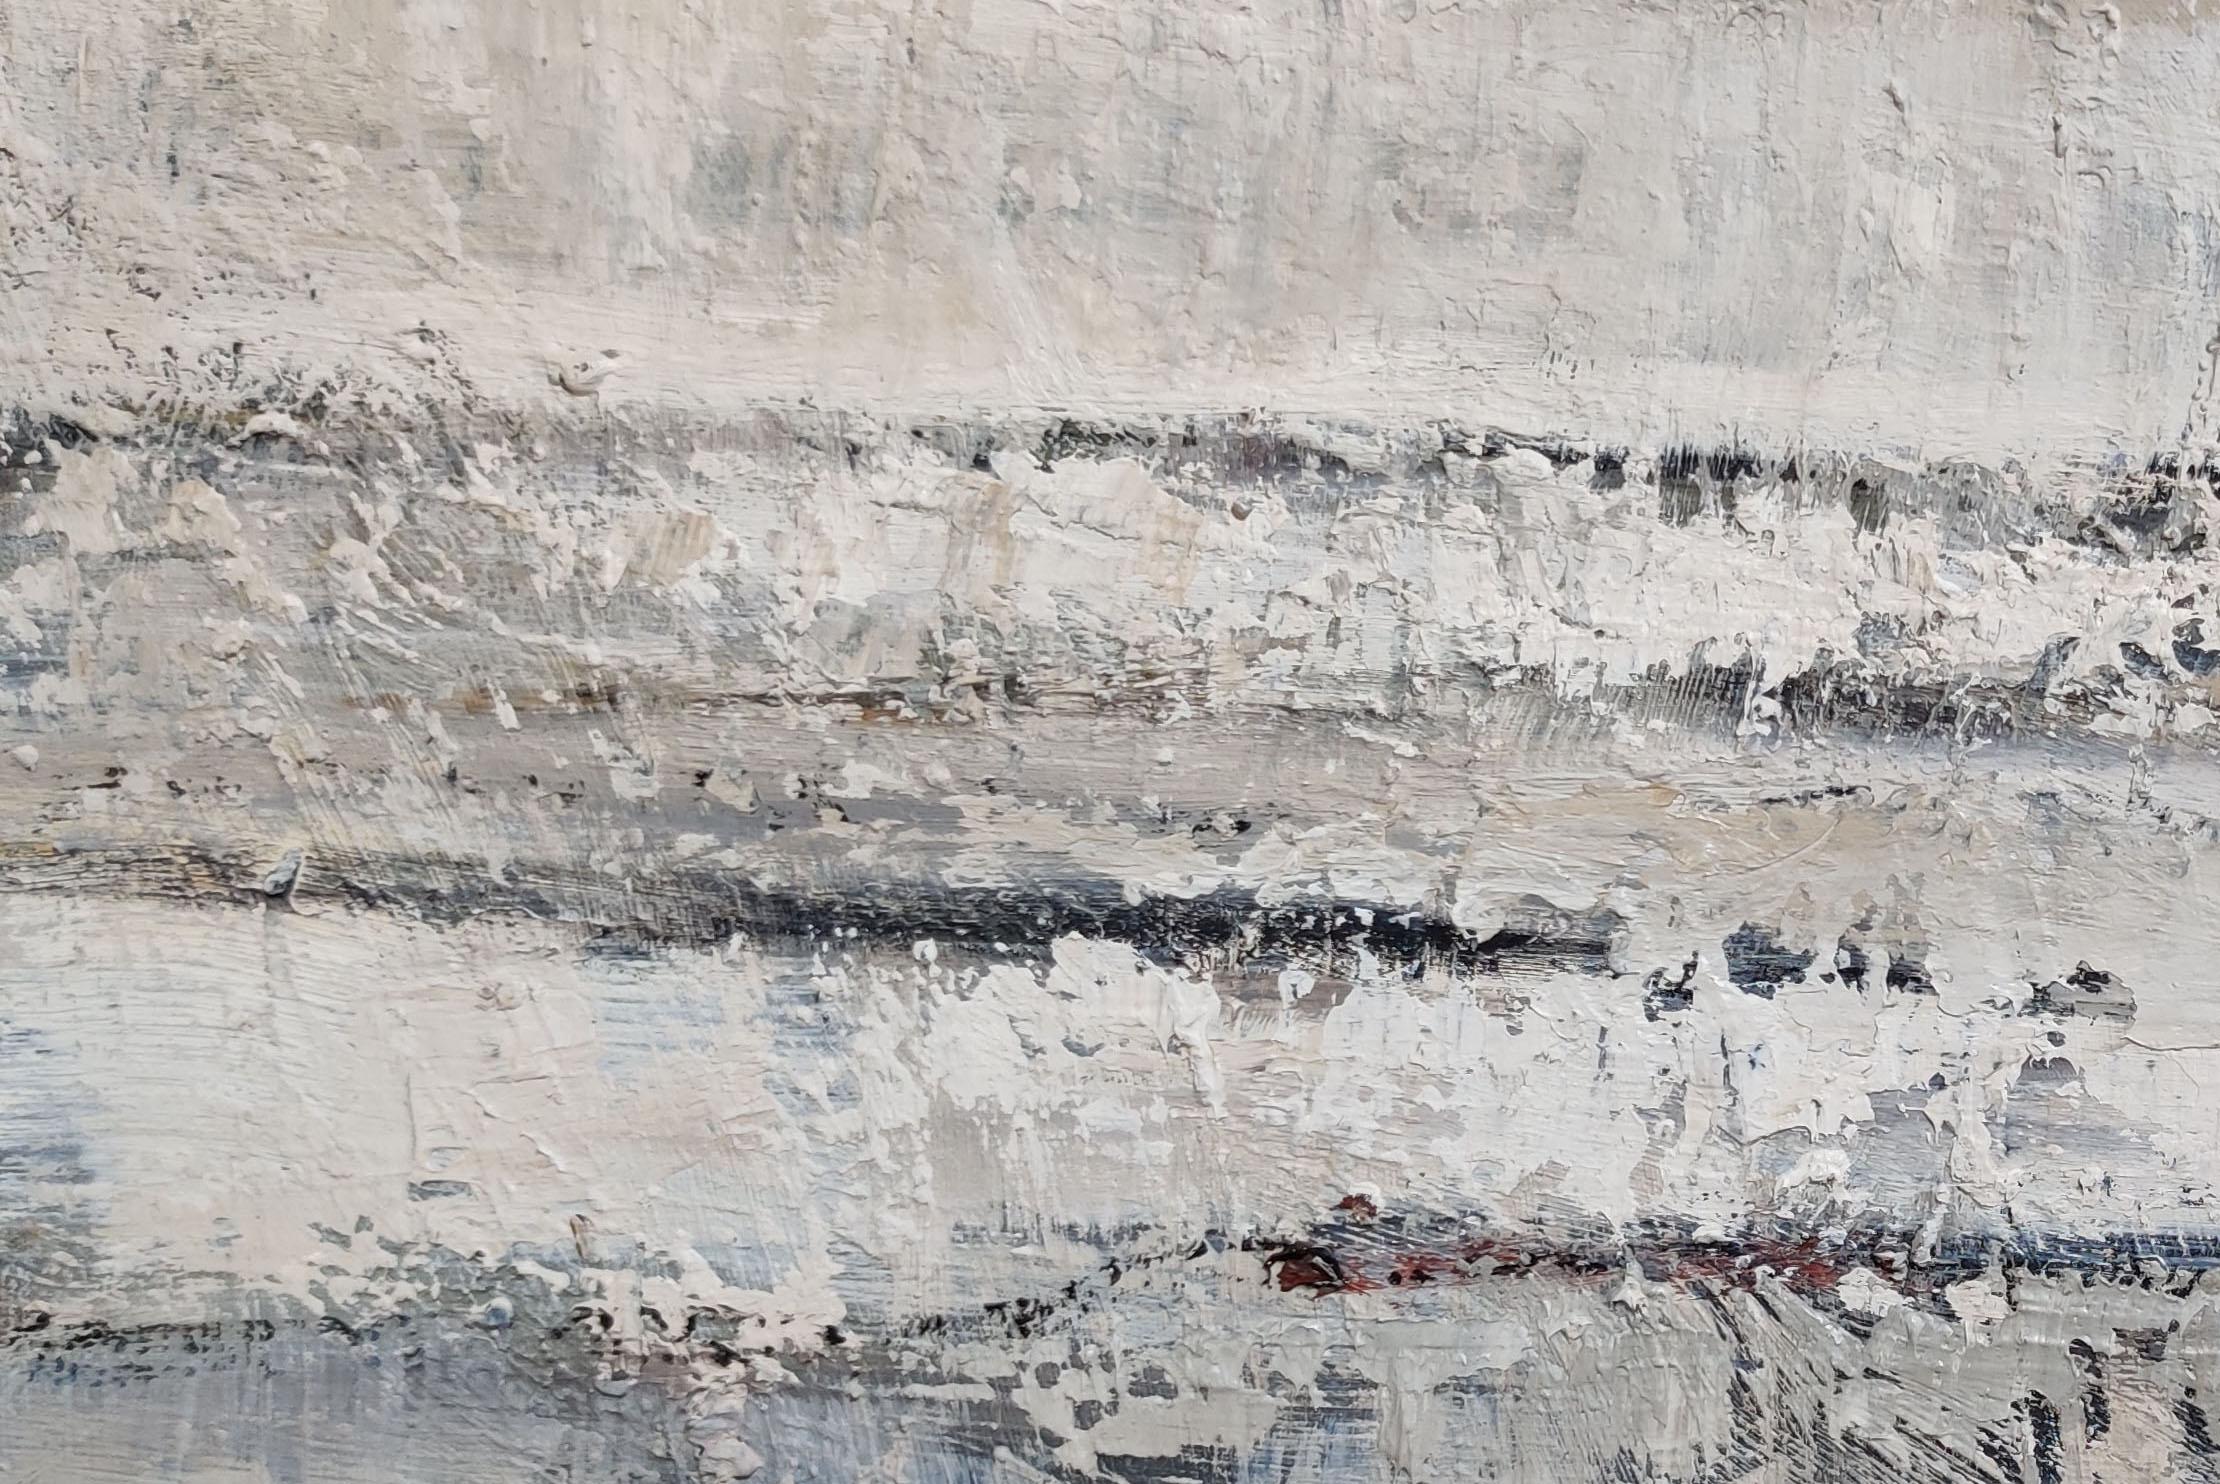 les dunes, oil on canvas board, abstract landscape, modern, expressionism, gray - Gray Landscape Painting by SOPHIE DUMONT